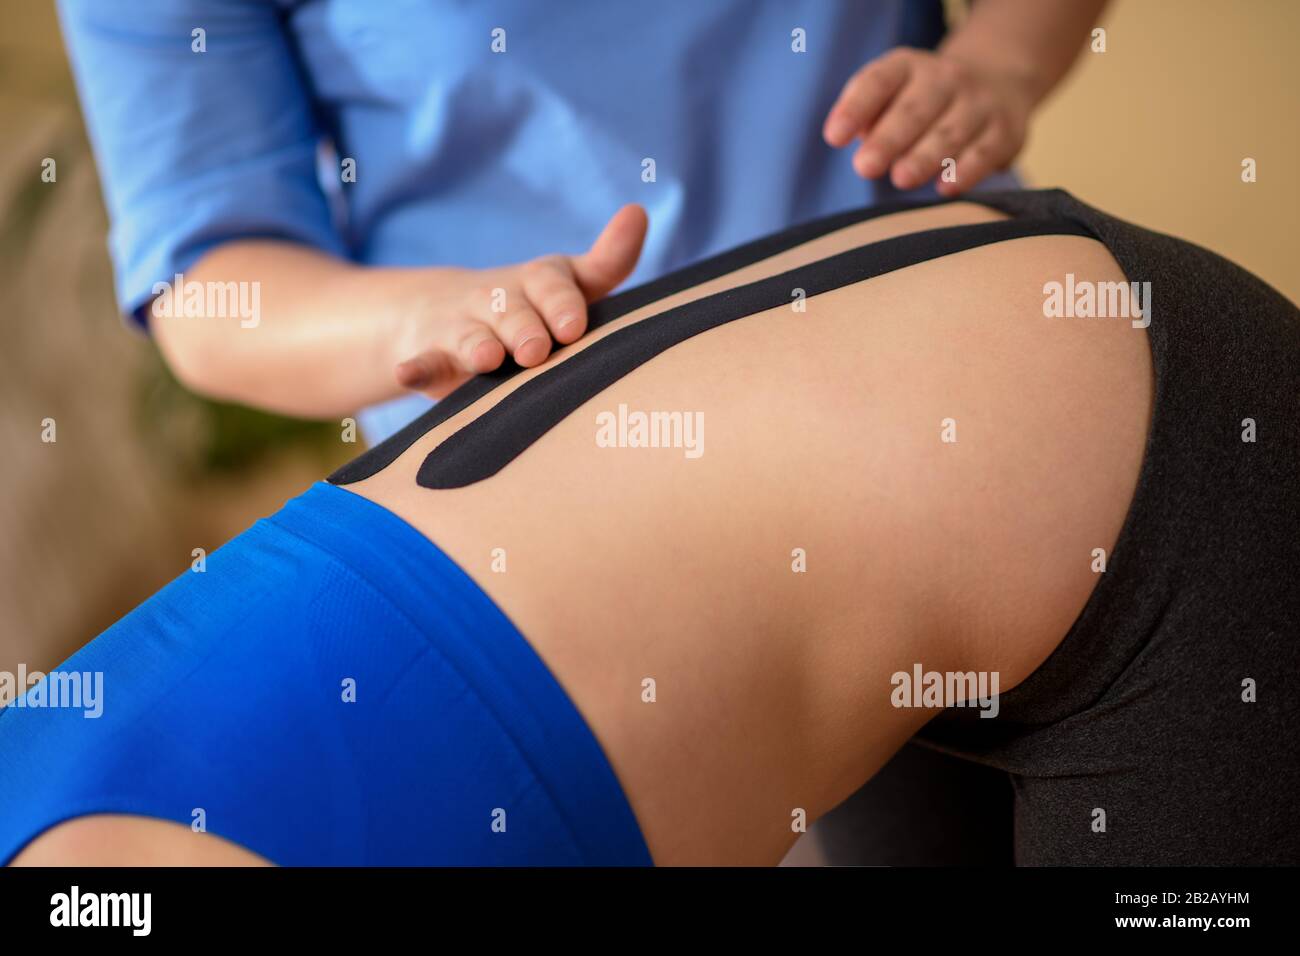 Physical therapist applying kinesio tape on female patient's lower back. Kinesiology, physical therapy, rehabilitation concept. Cropped shot close up. Stock Photo